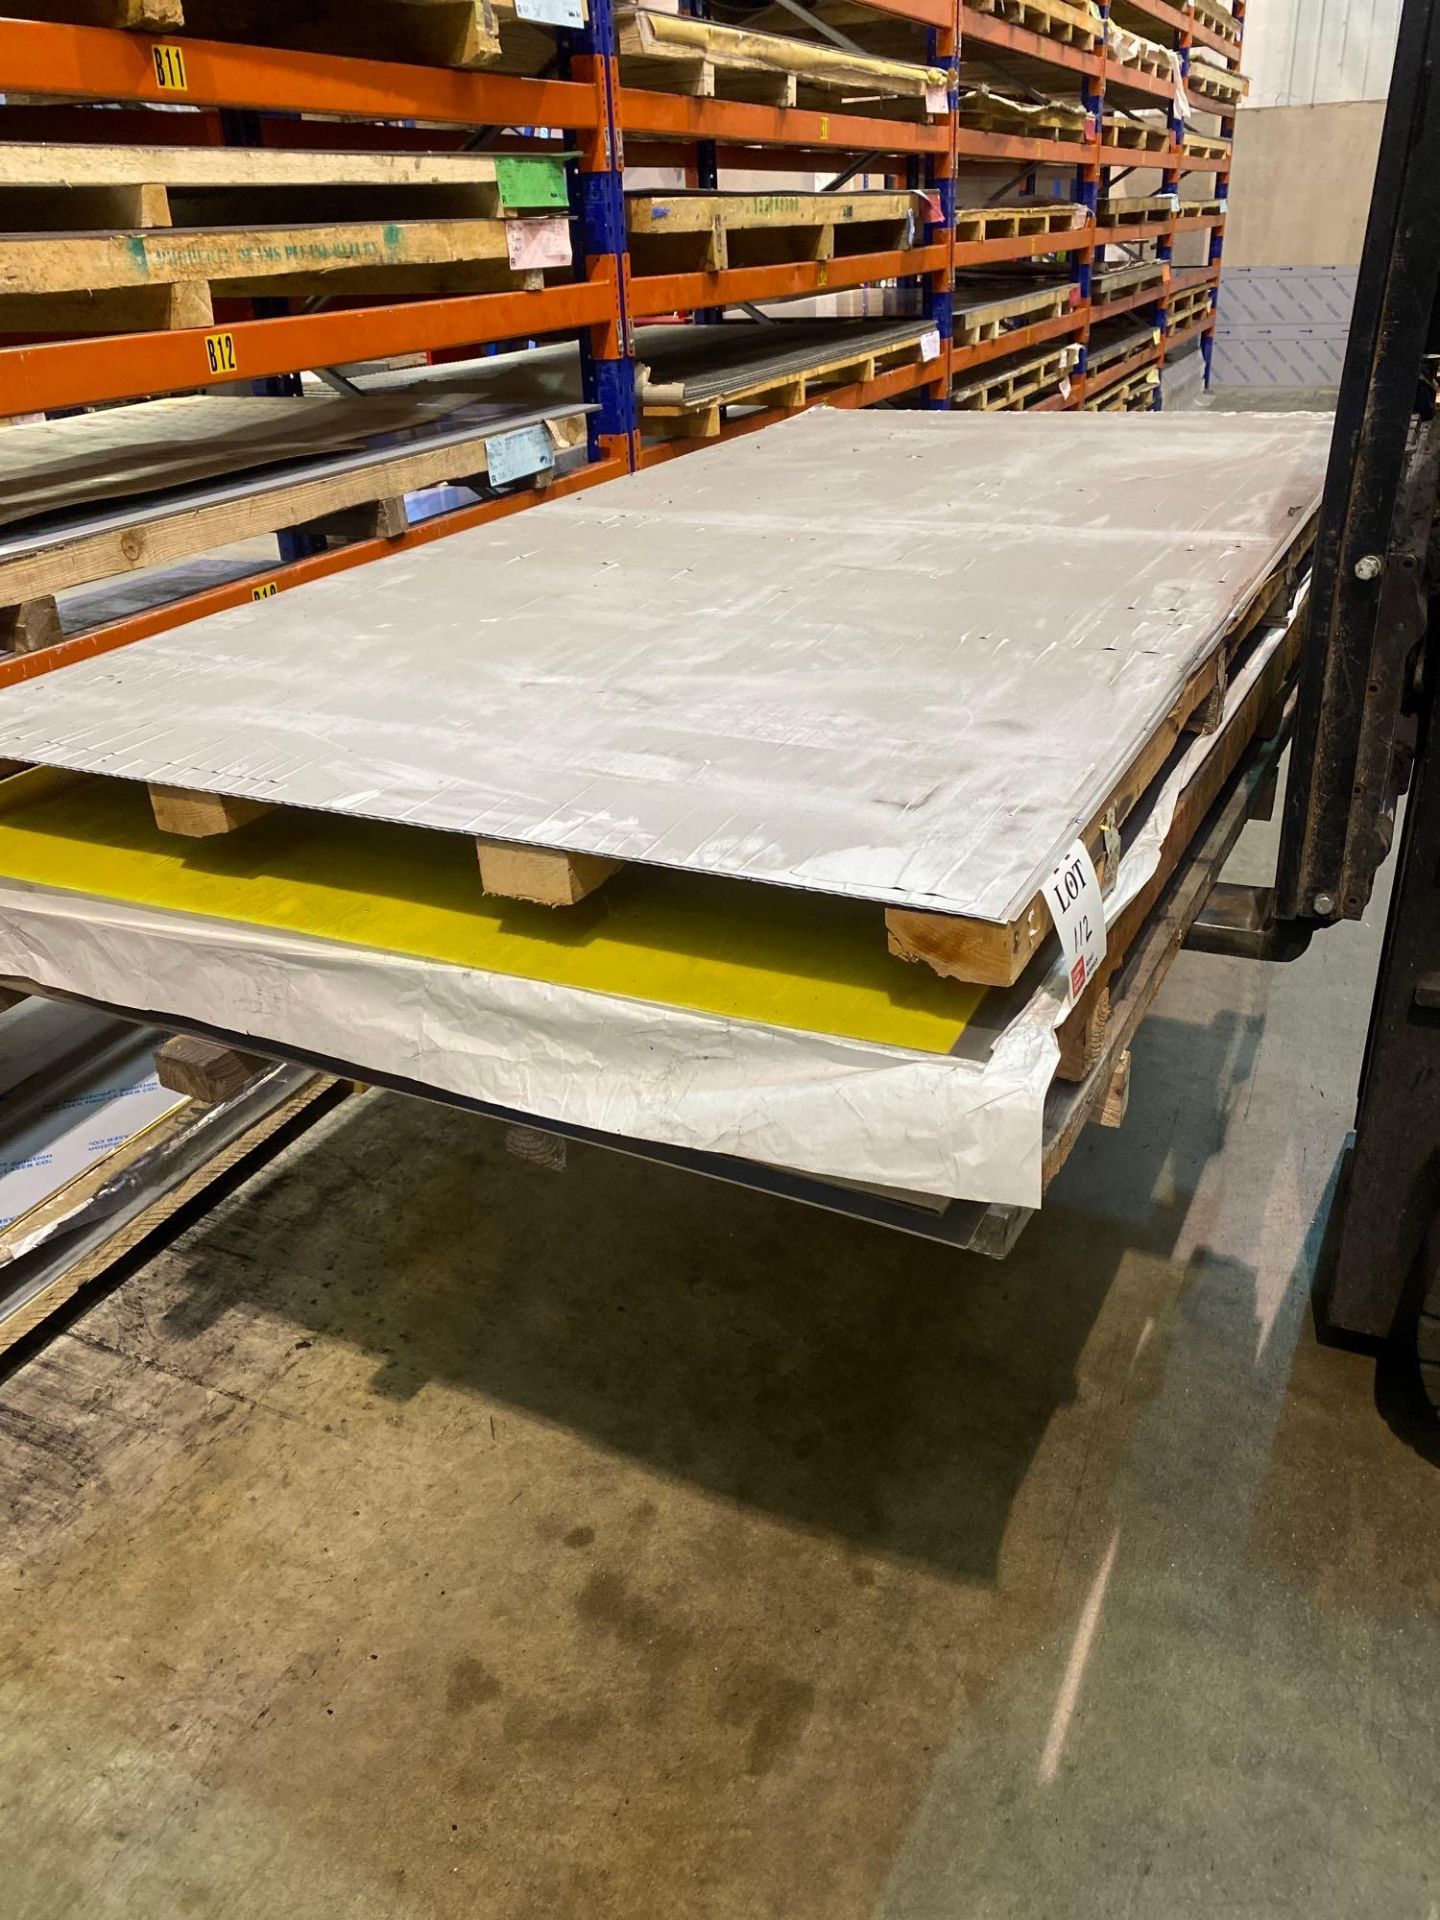 Contents of Rack B2 to include 2 sheets of 304 240 stainless steel 2.5 x 1.25m 0.9mm thick, 7 sheets